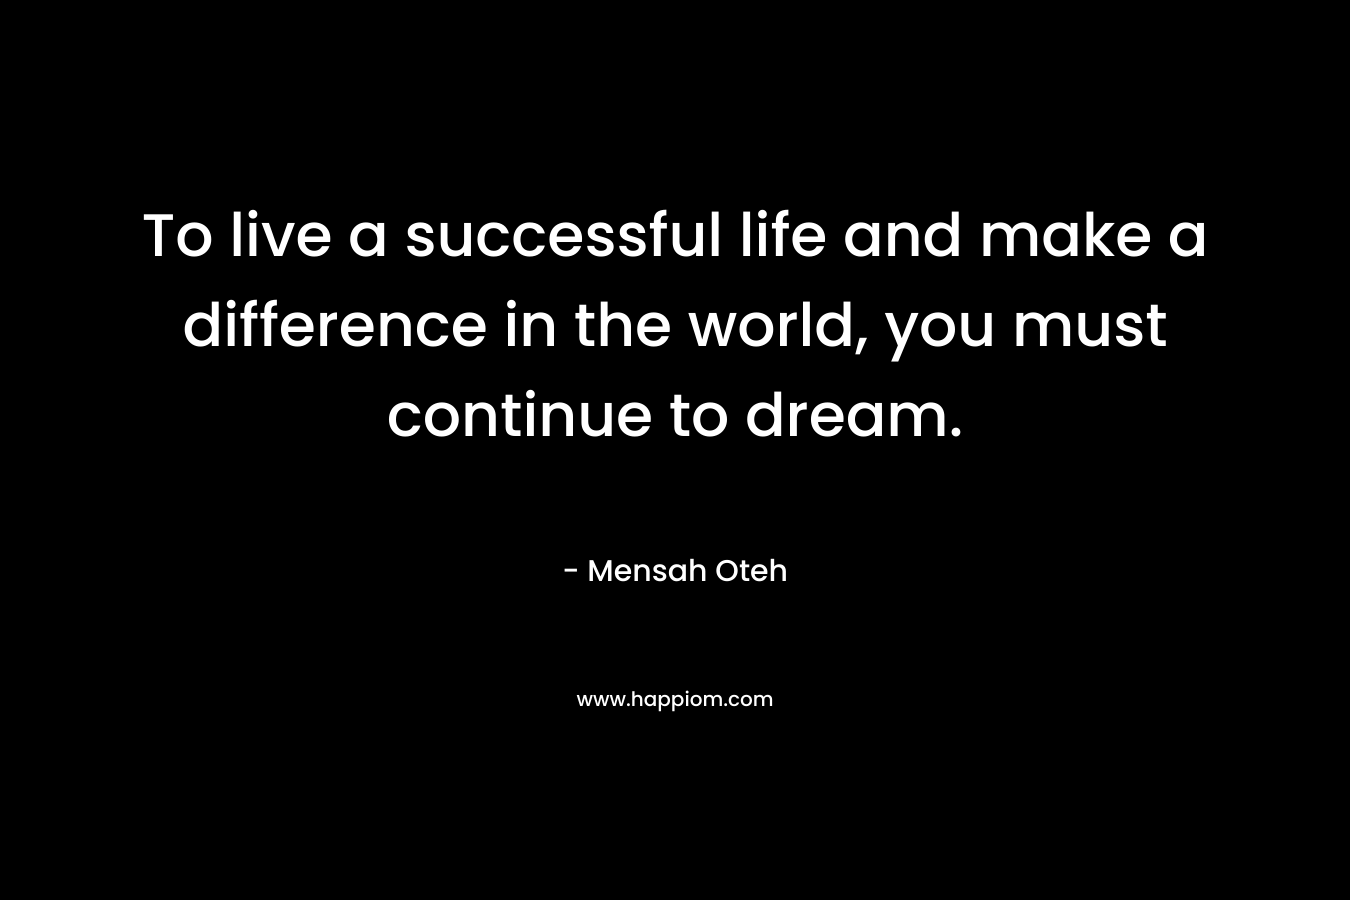 To live a successful life and make a difference in the world, you must continue to dream.